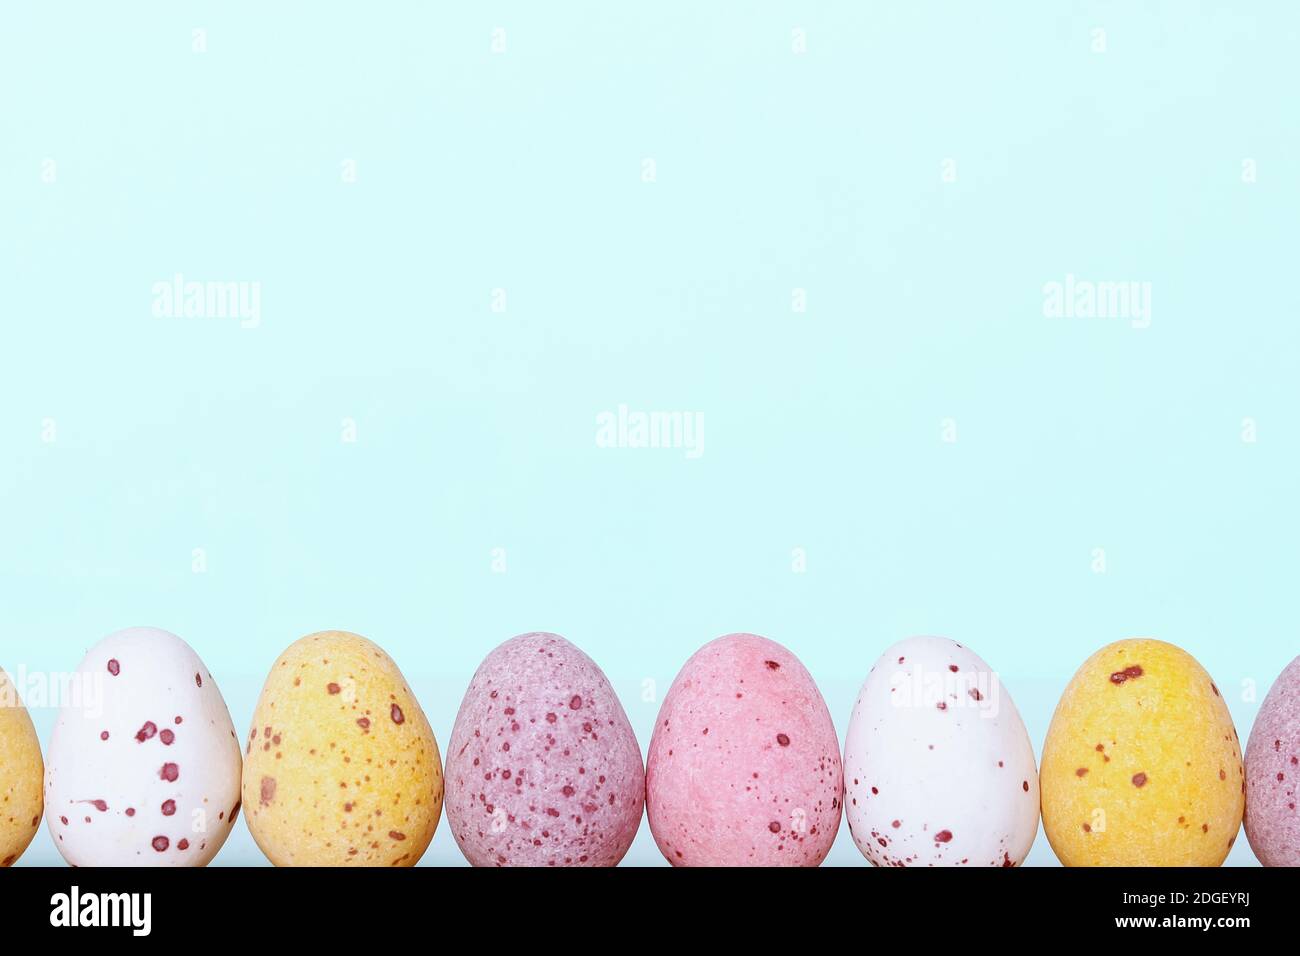 Funny kid's Easter border. Easter card with colorful eggs on light blue background. Copy space. Close-up. White yellow pink eggs for Easter treat.  Stock Photo